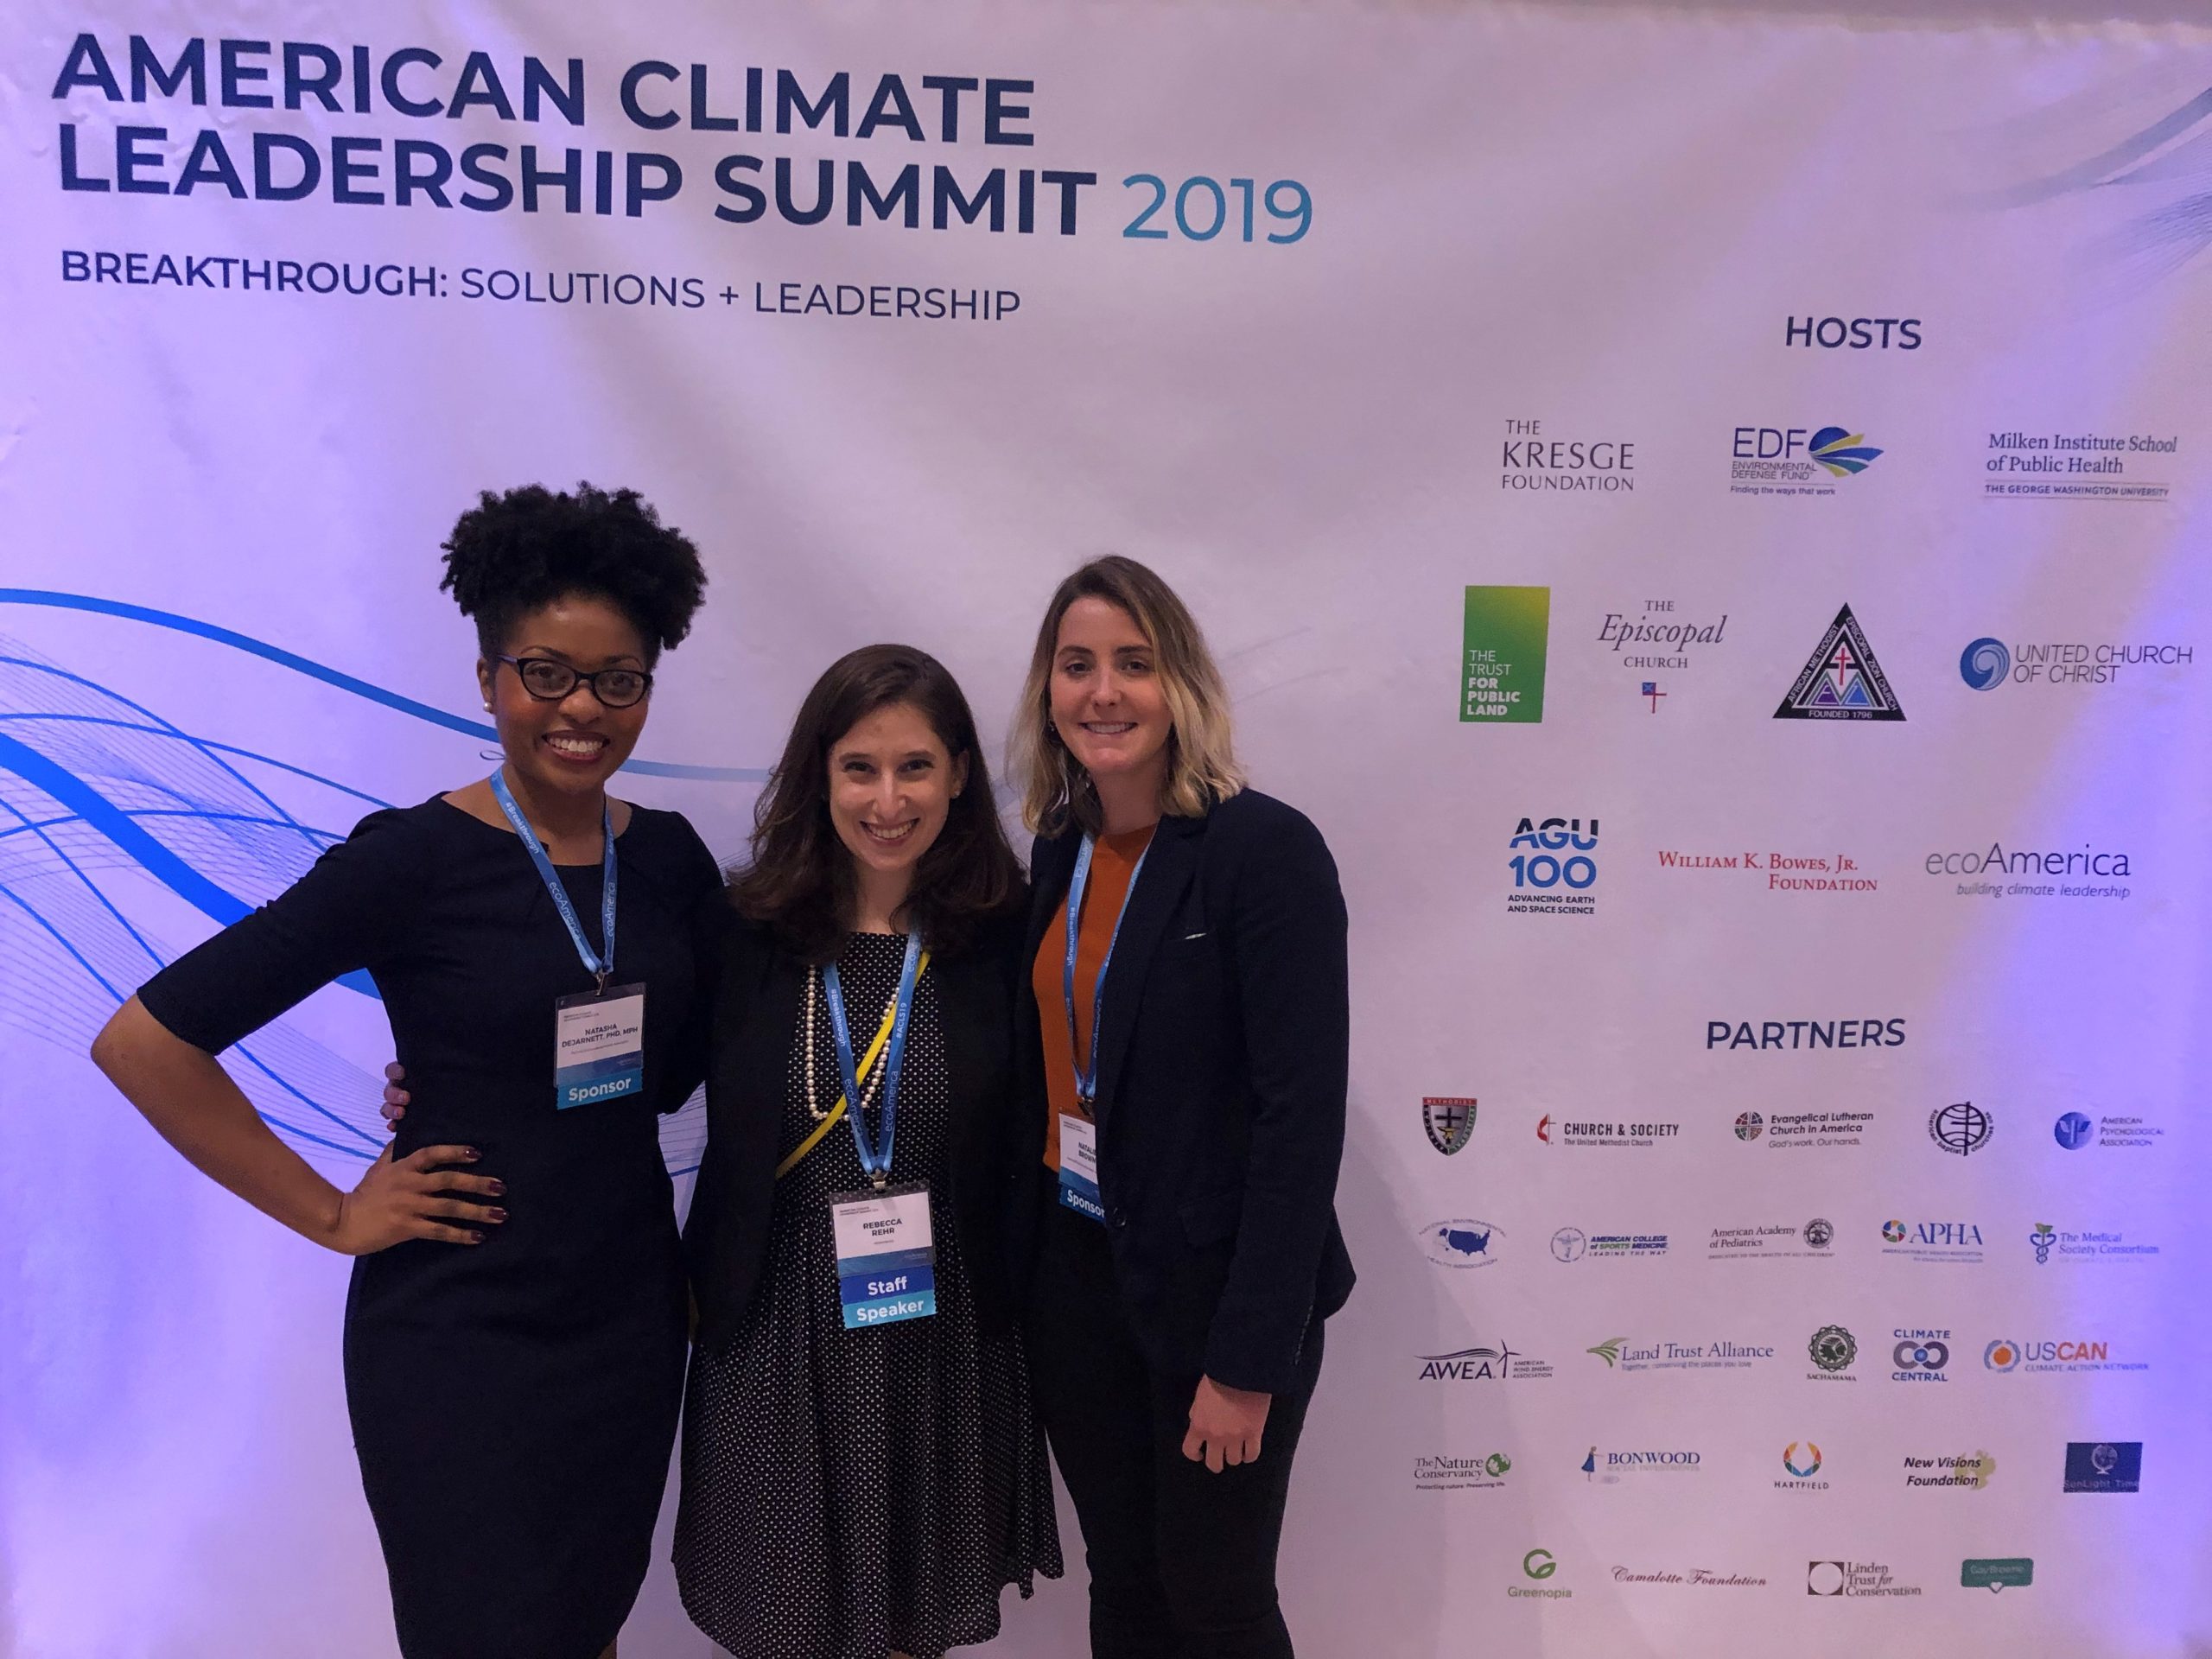 Turning Research into Action: Lessons from the American Climate Leadership Summit 2019